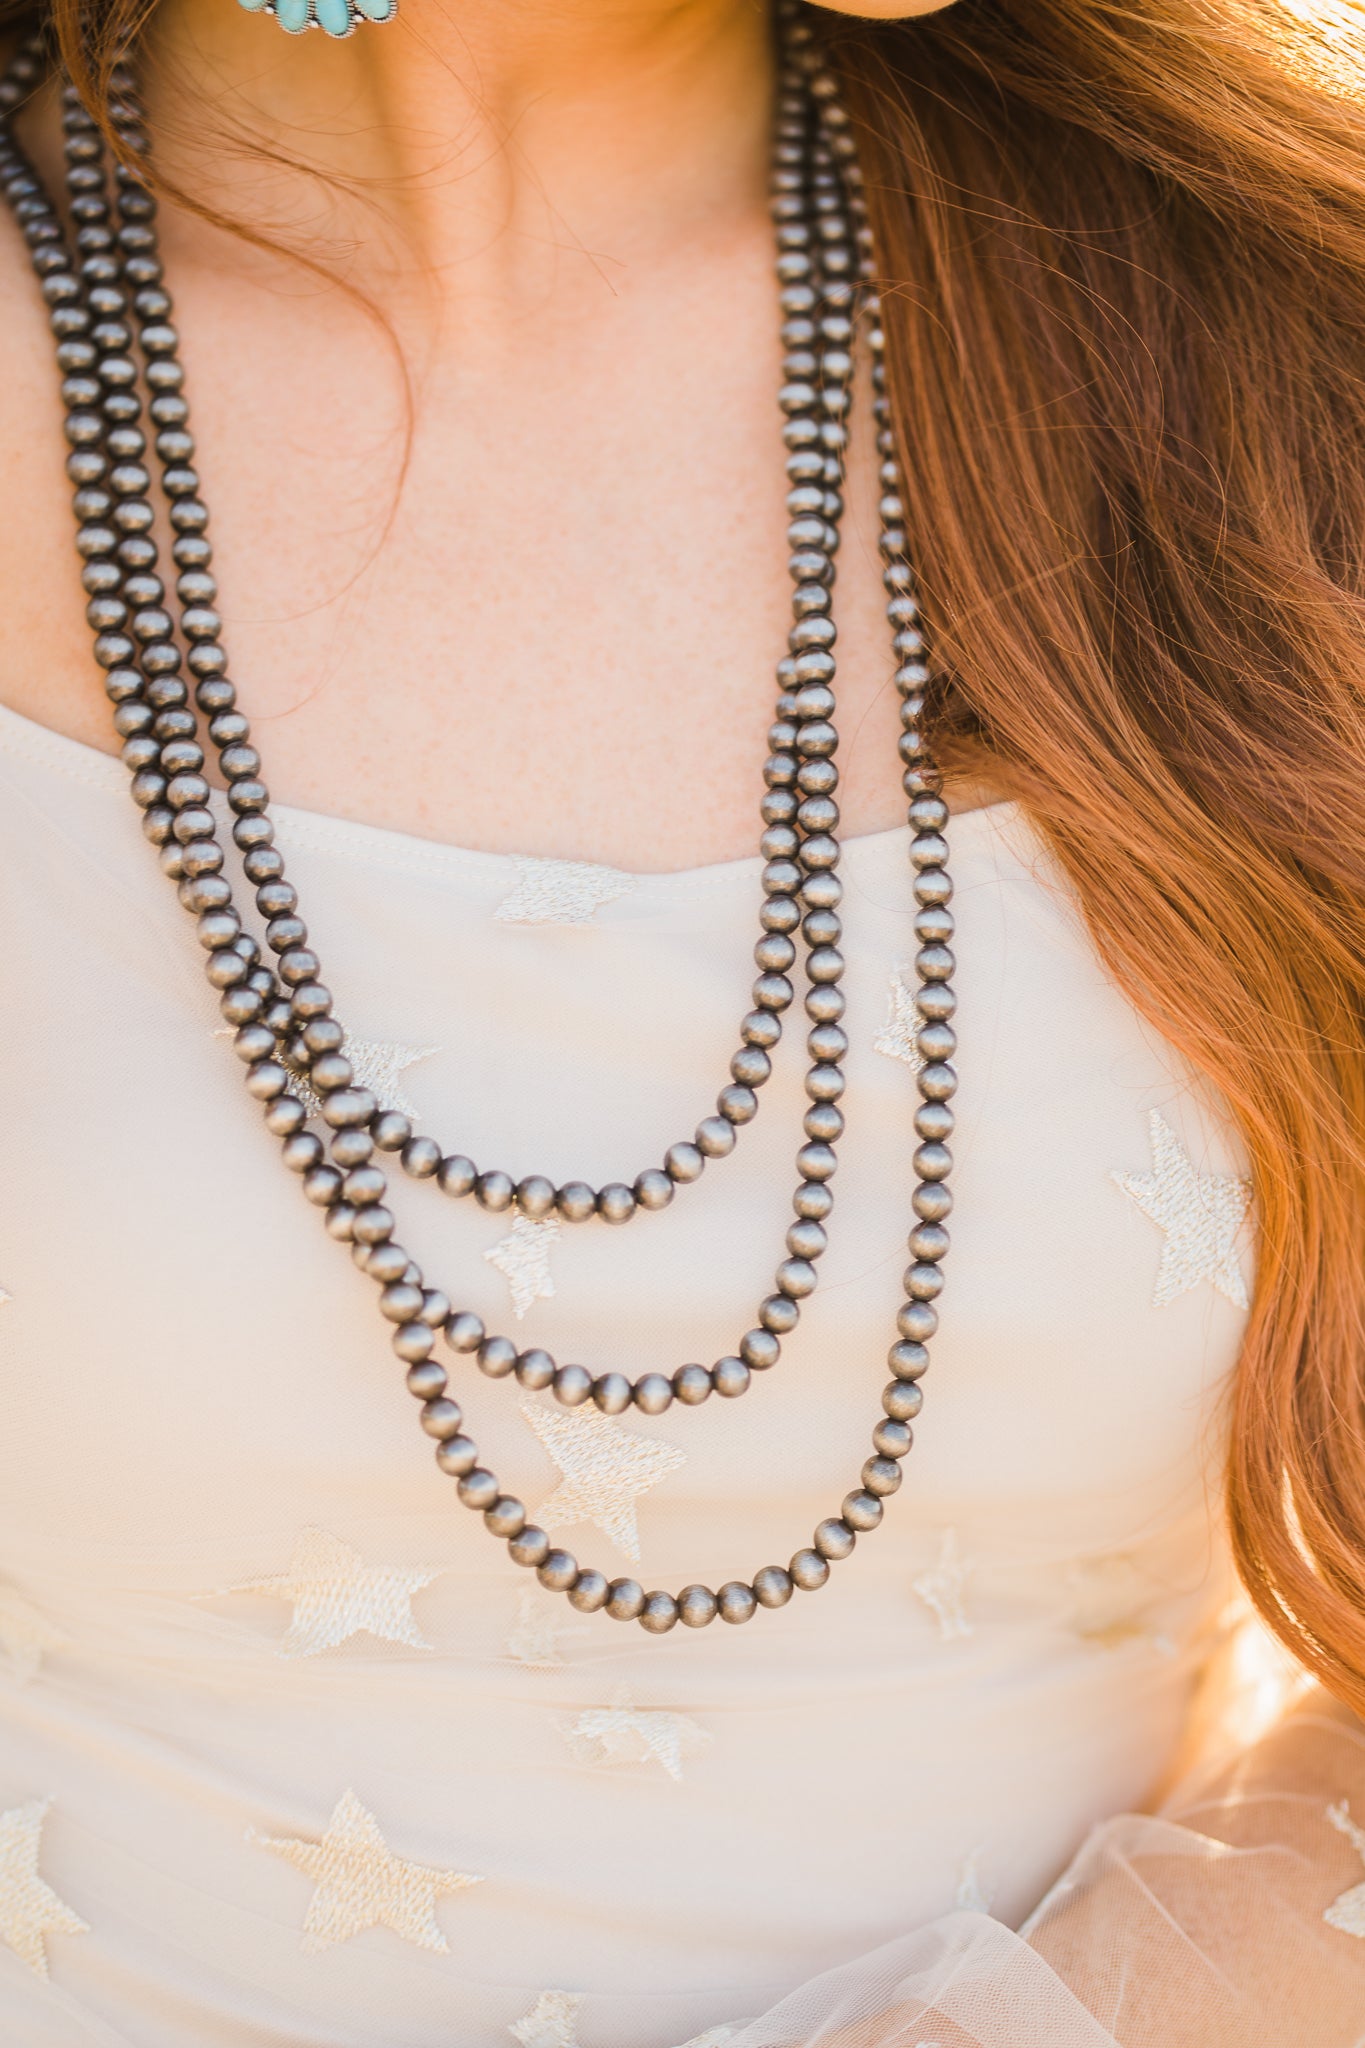 Main Attraction Necklace - Middle West Apparel